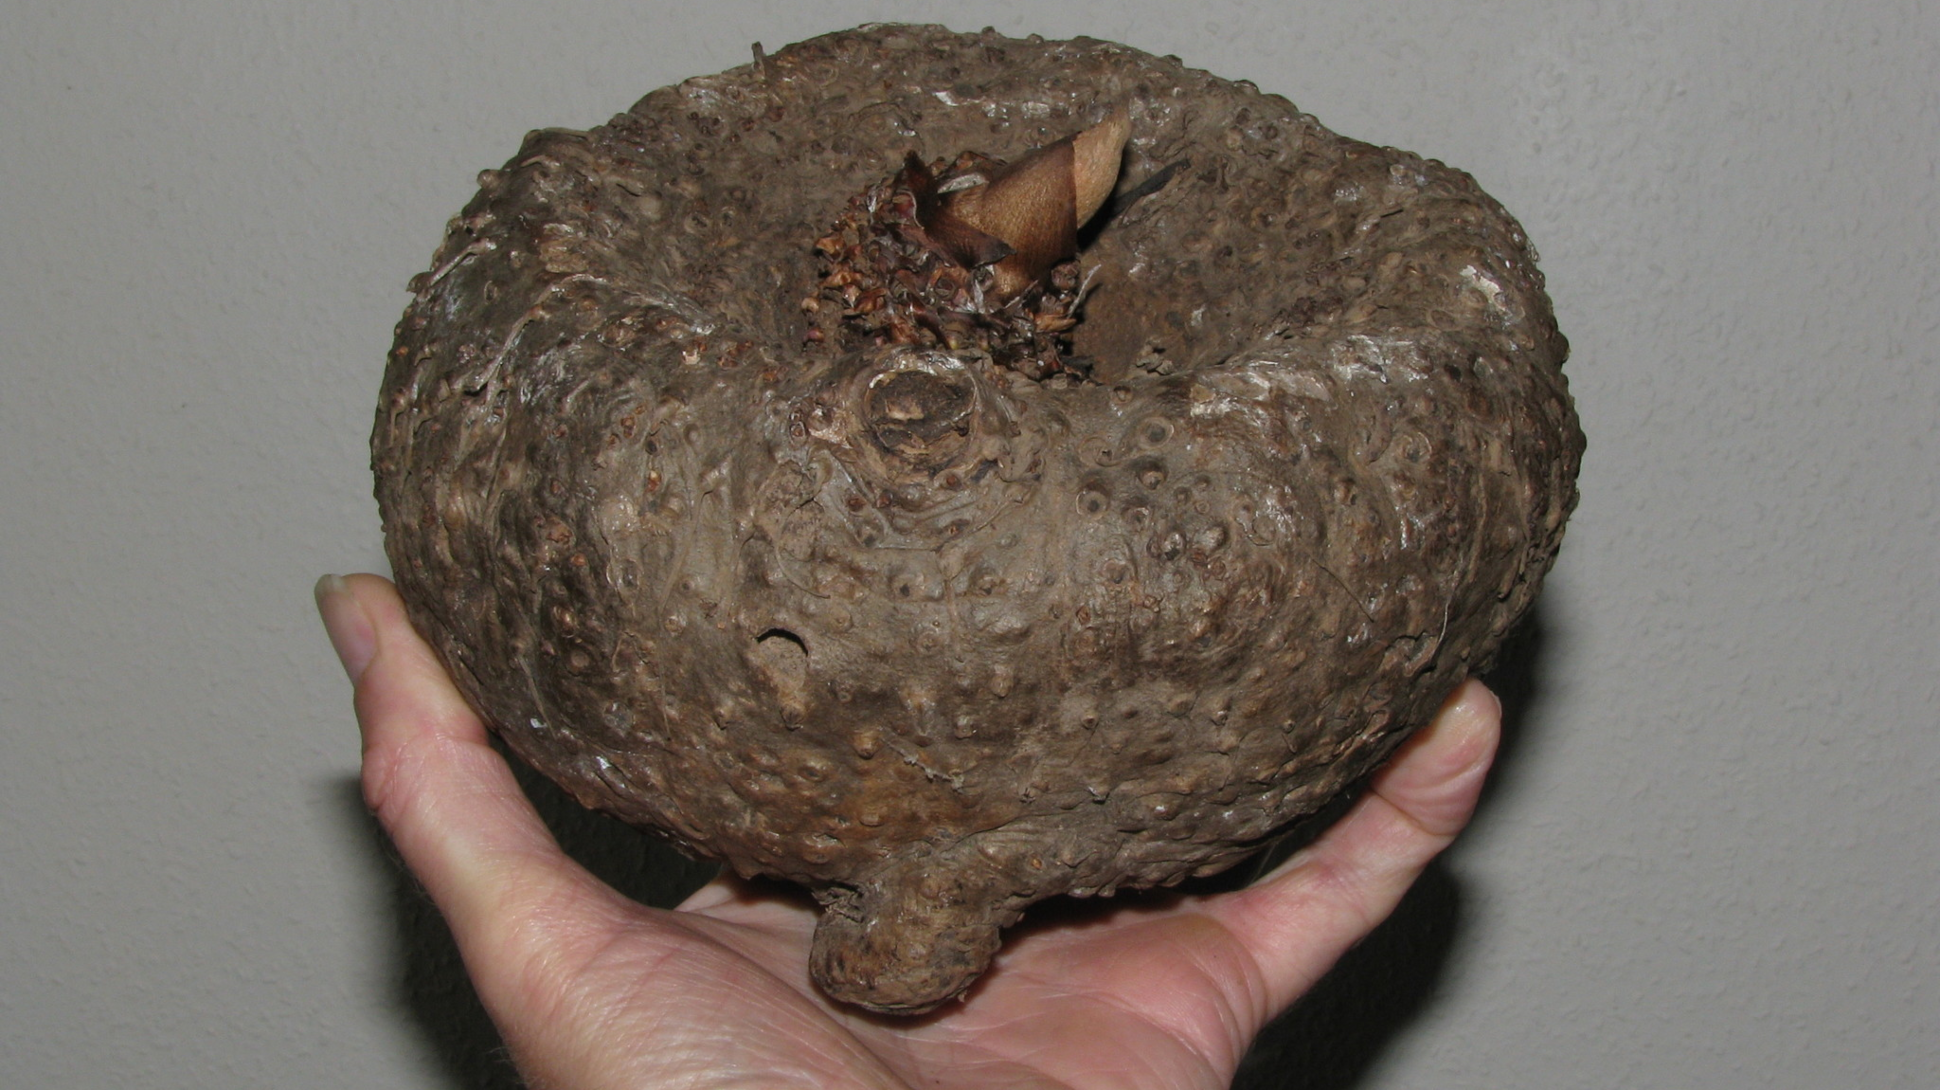 A large rough skinned brown corm being held by a white hand